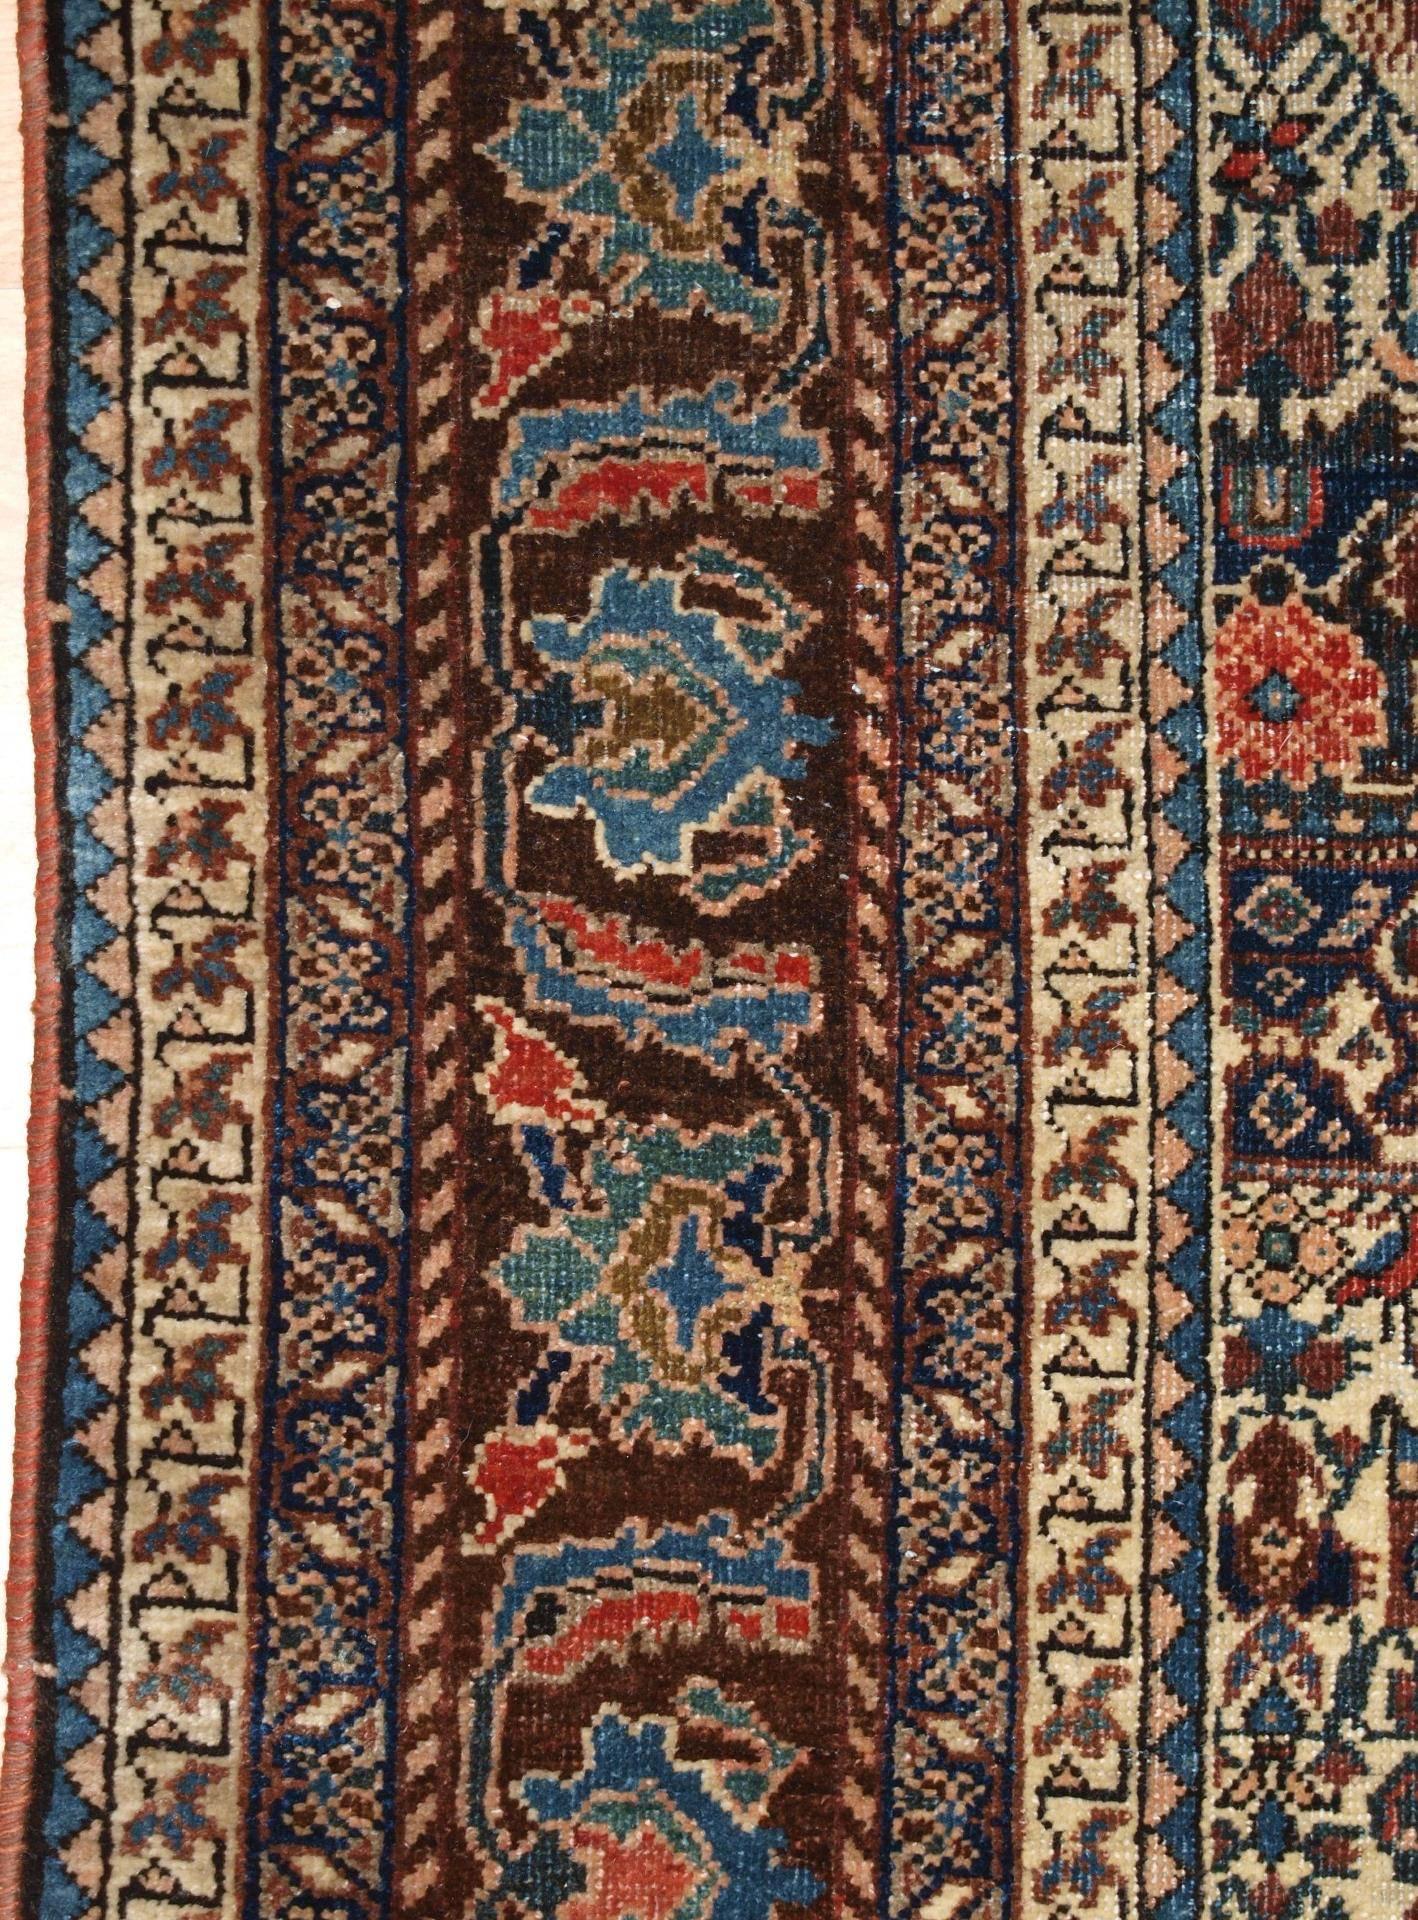 Central Asian Antique Abedeh Rug with the Classic ‘Vase and Peacock’ Design, circa 1900-1920